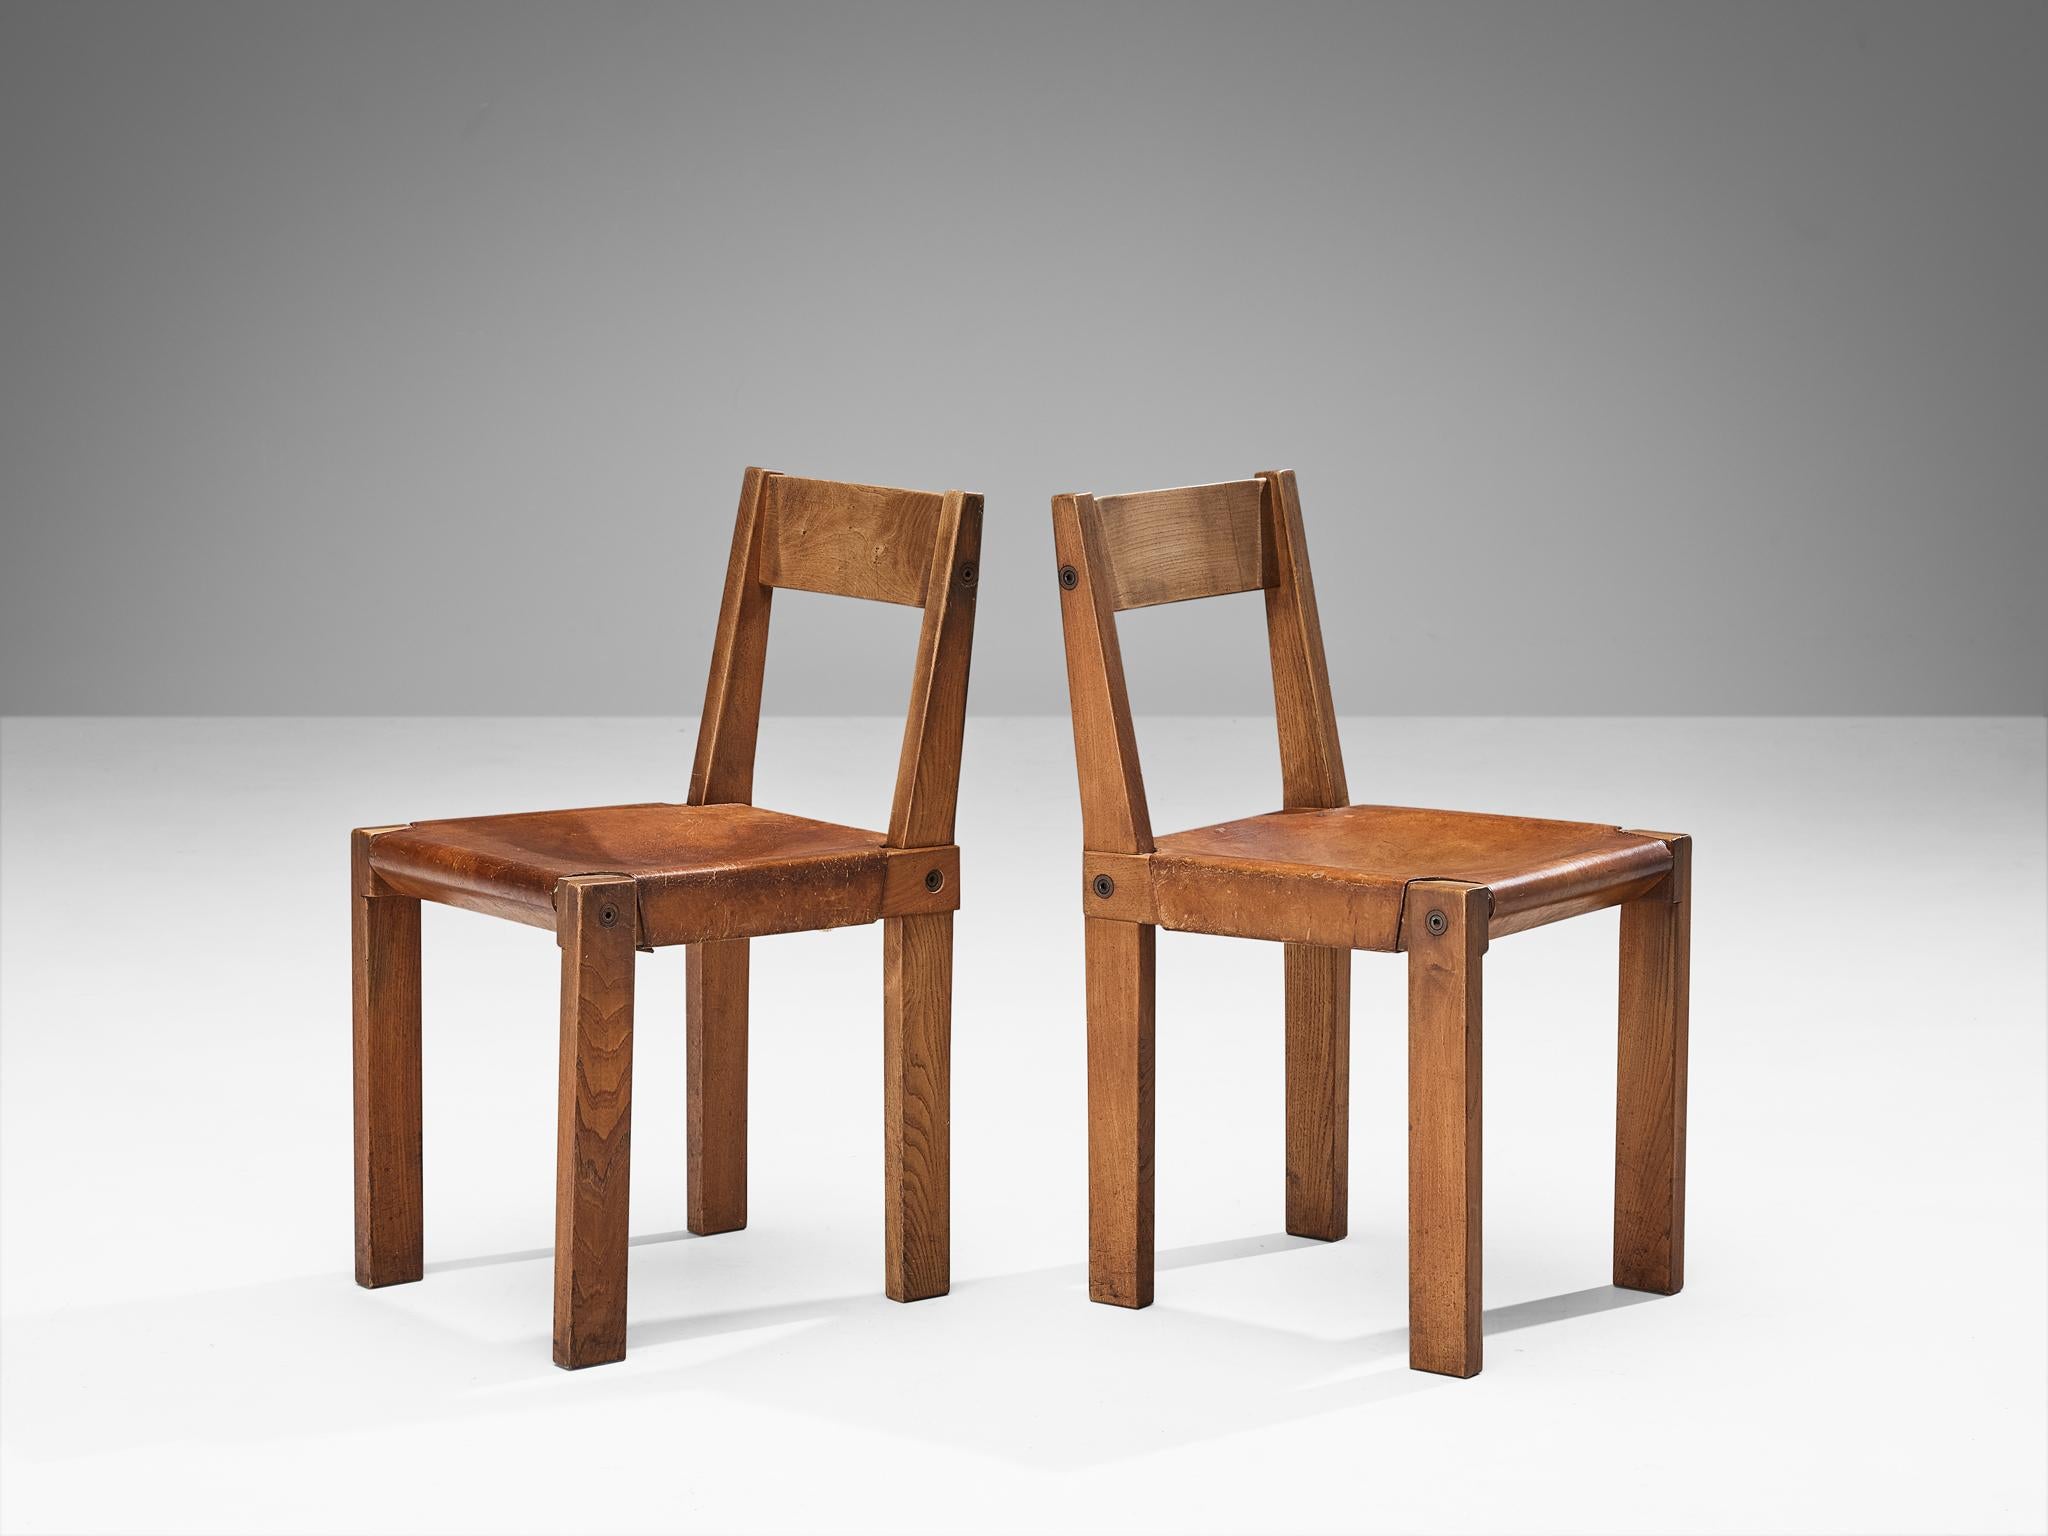 Pierre Chapo, dining chairs, model 'S24', elm, leather, cord, France, 1967

This design model S24 is an early edition created by Pierre Chapo. Crafted from solid elmwood, the chairs exhibit a refined cubic design that is both sleek and contemporary